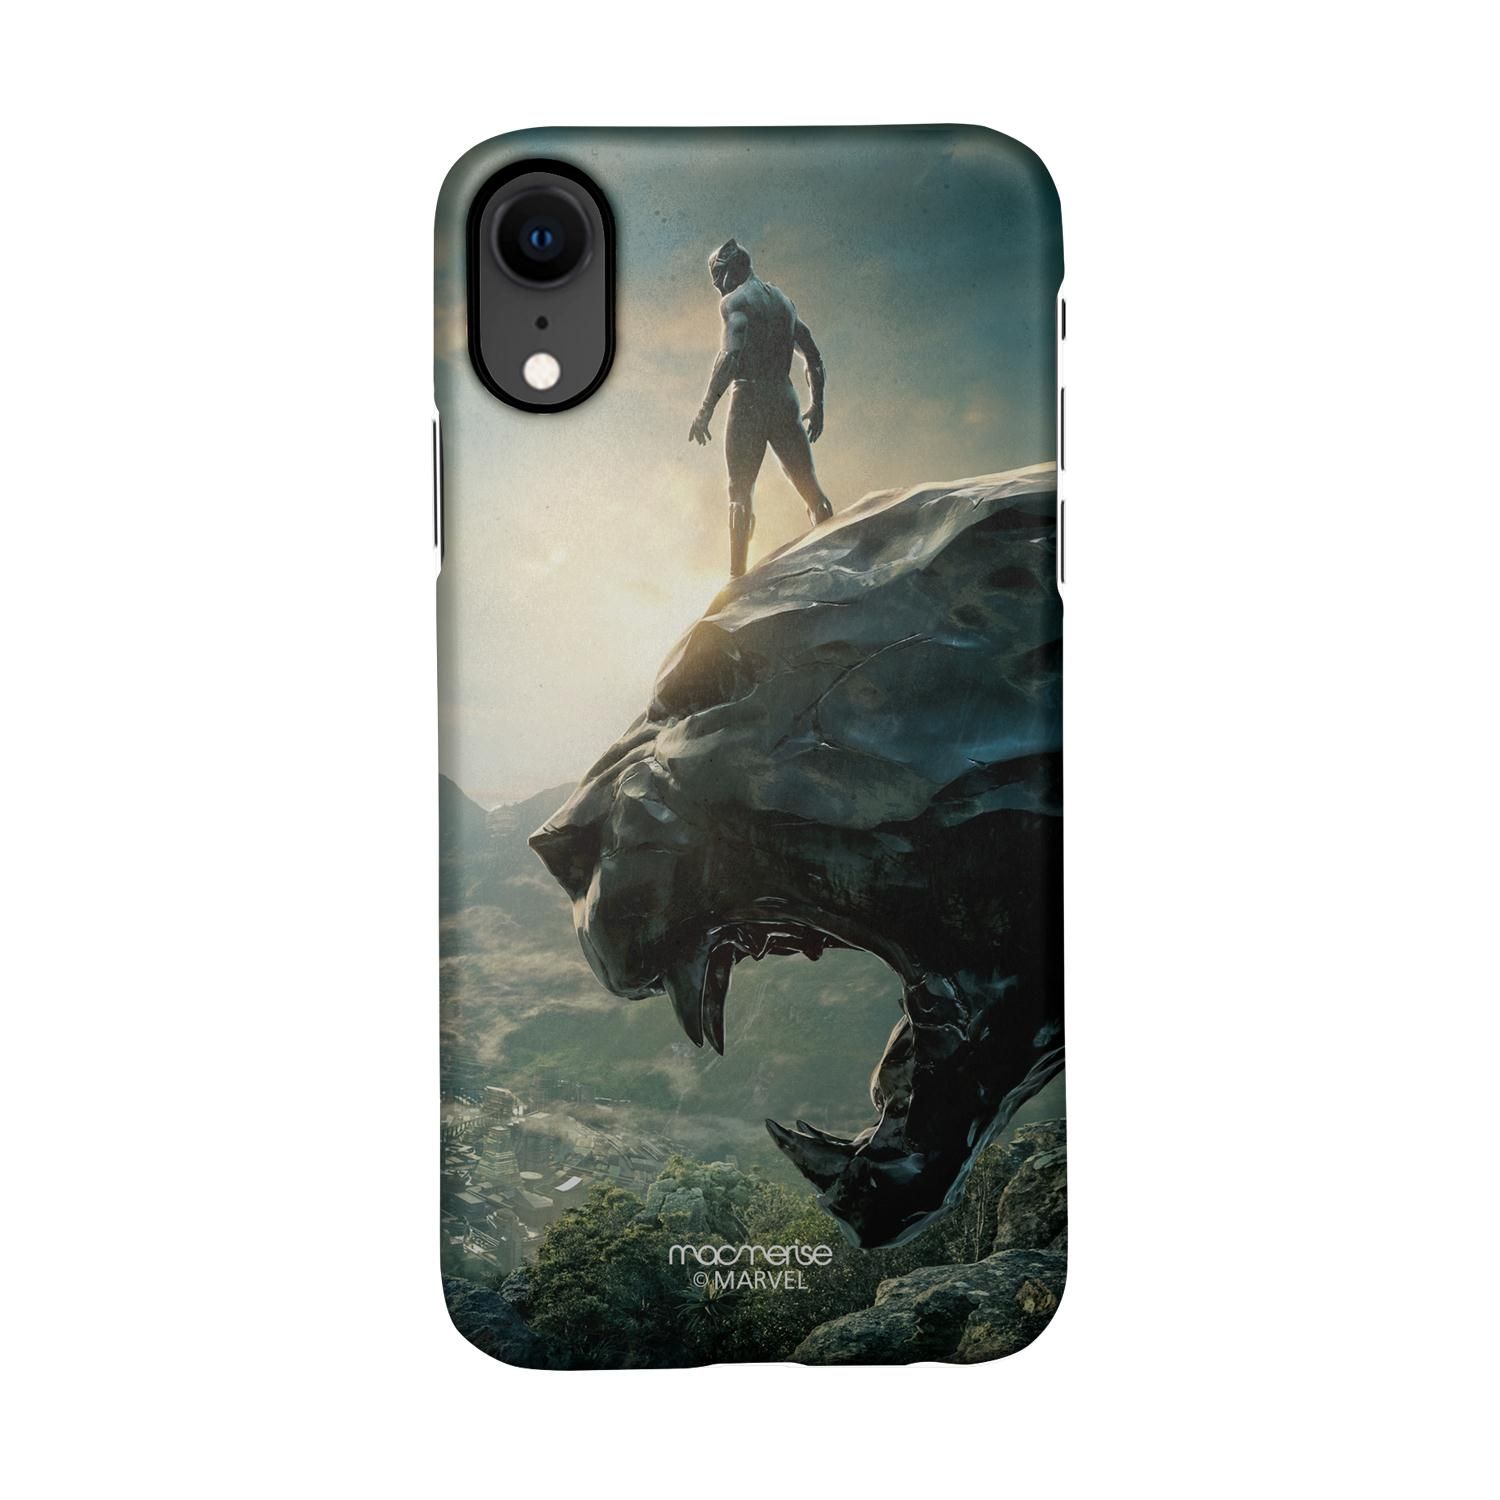 Panther Glorified - Sleek Phone Case for iPhone XR